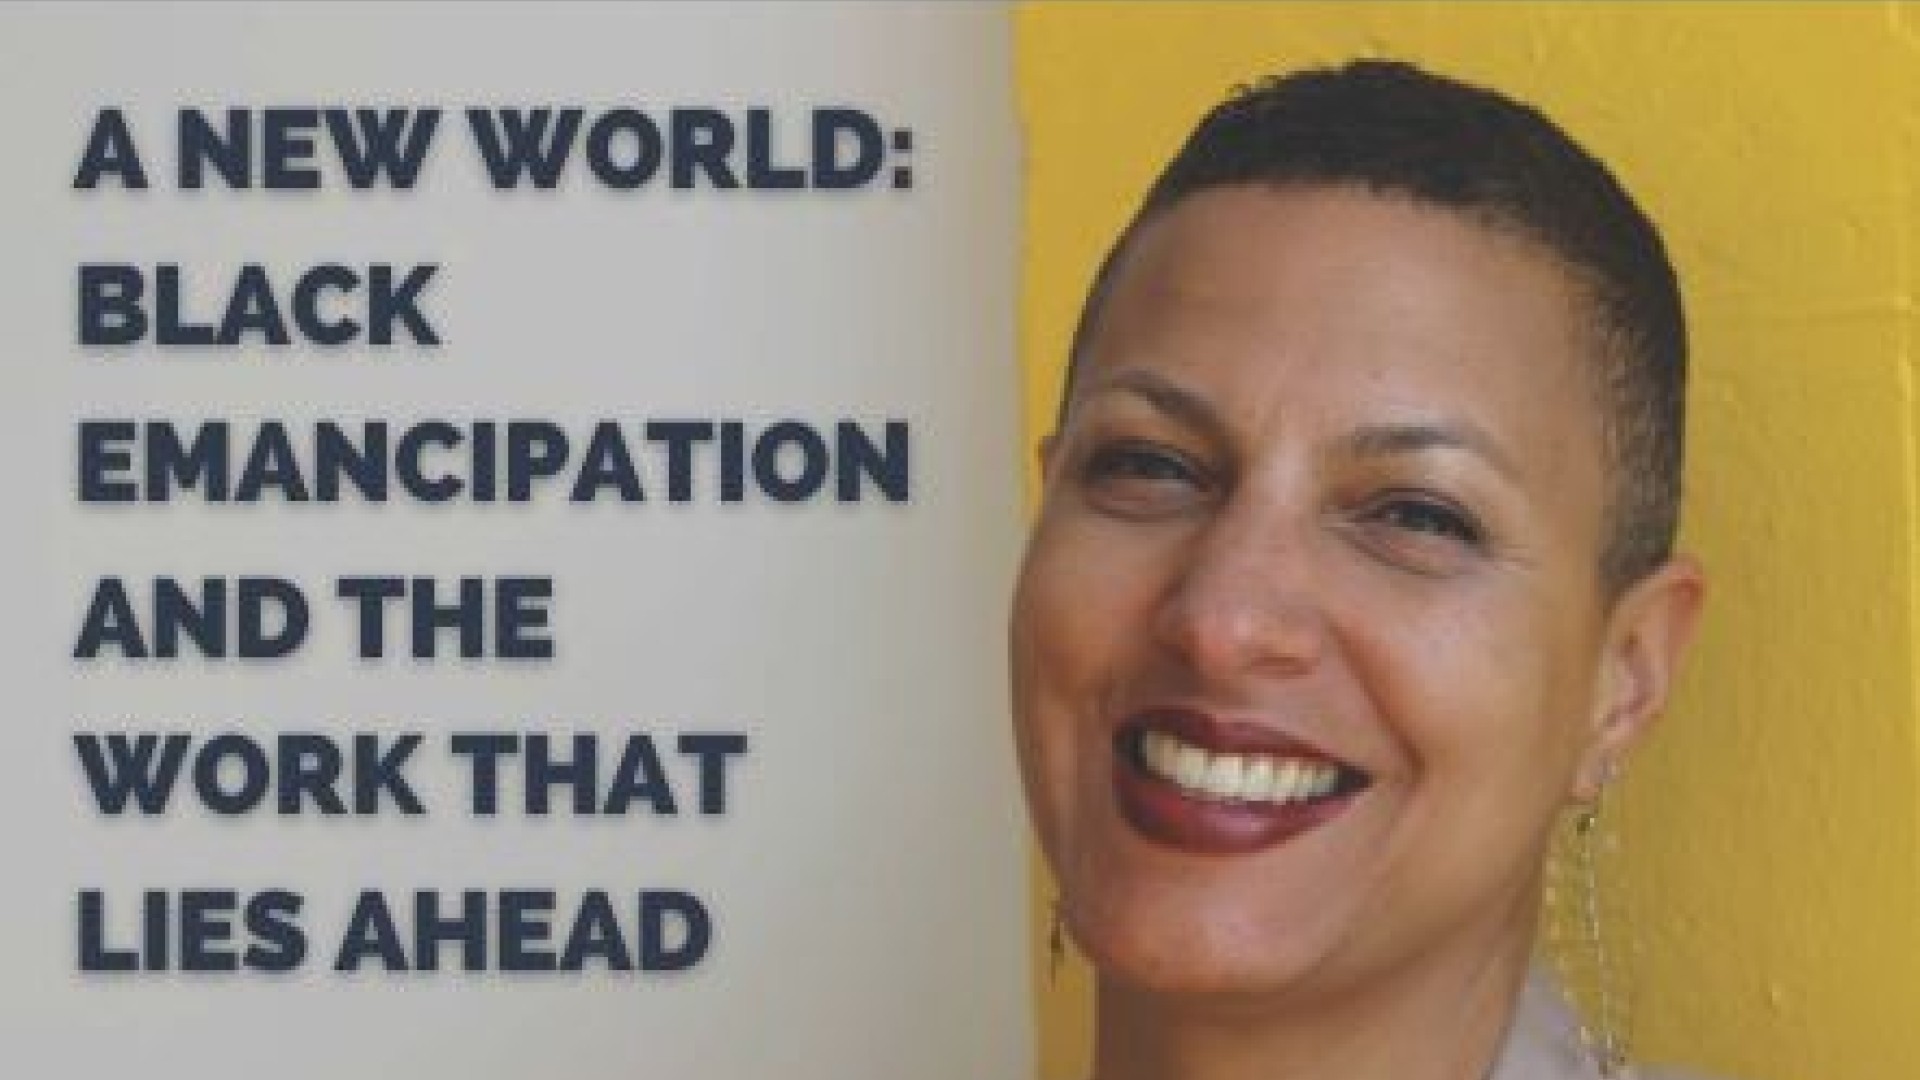 Poster: A New World: Black Emancipation And The Work That Lies Ahead, featuring Dr. Rachel Zellars